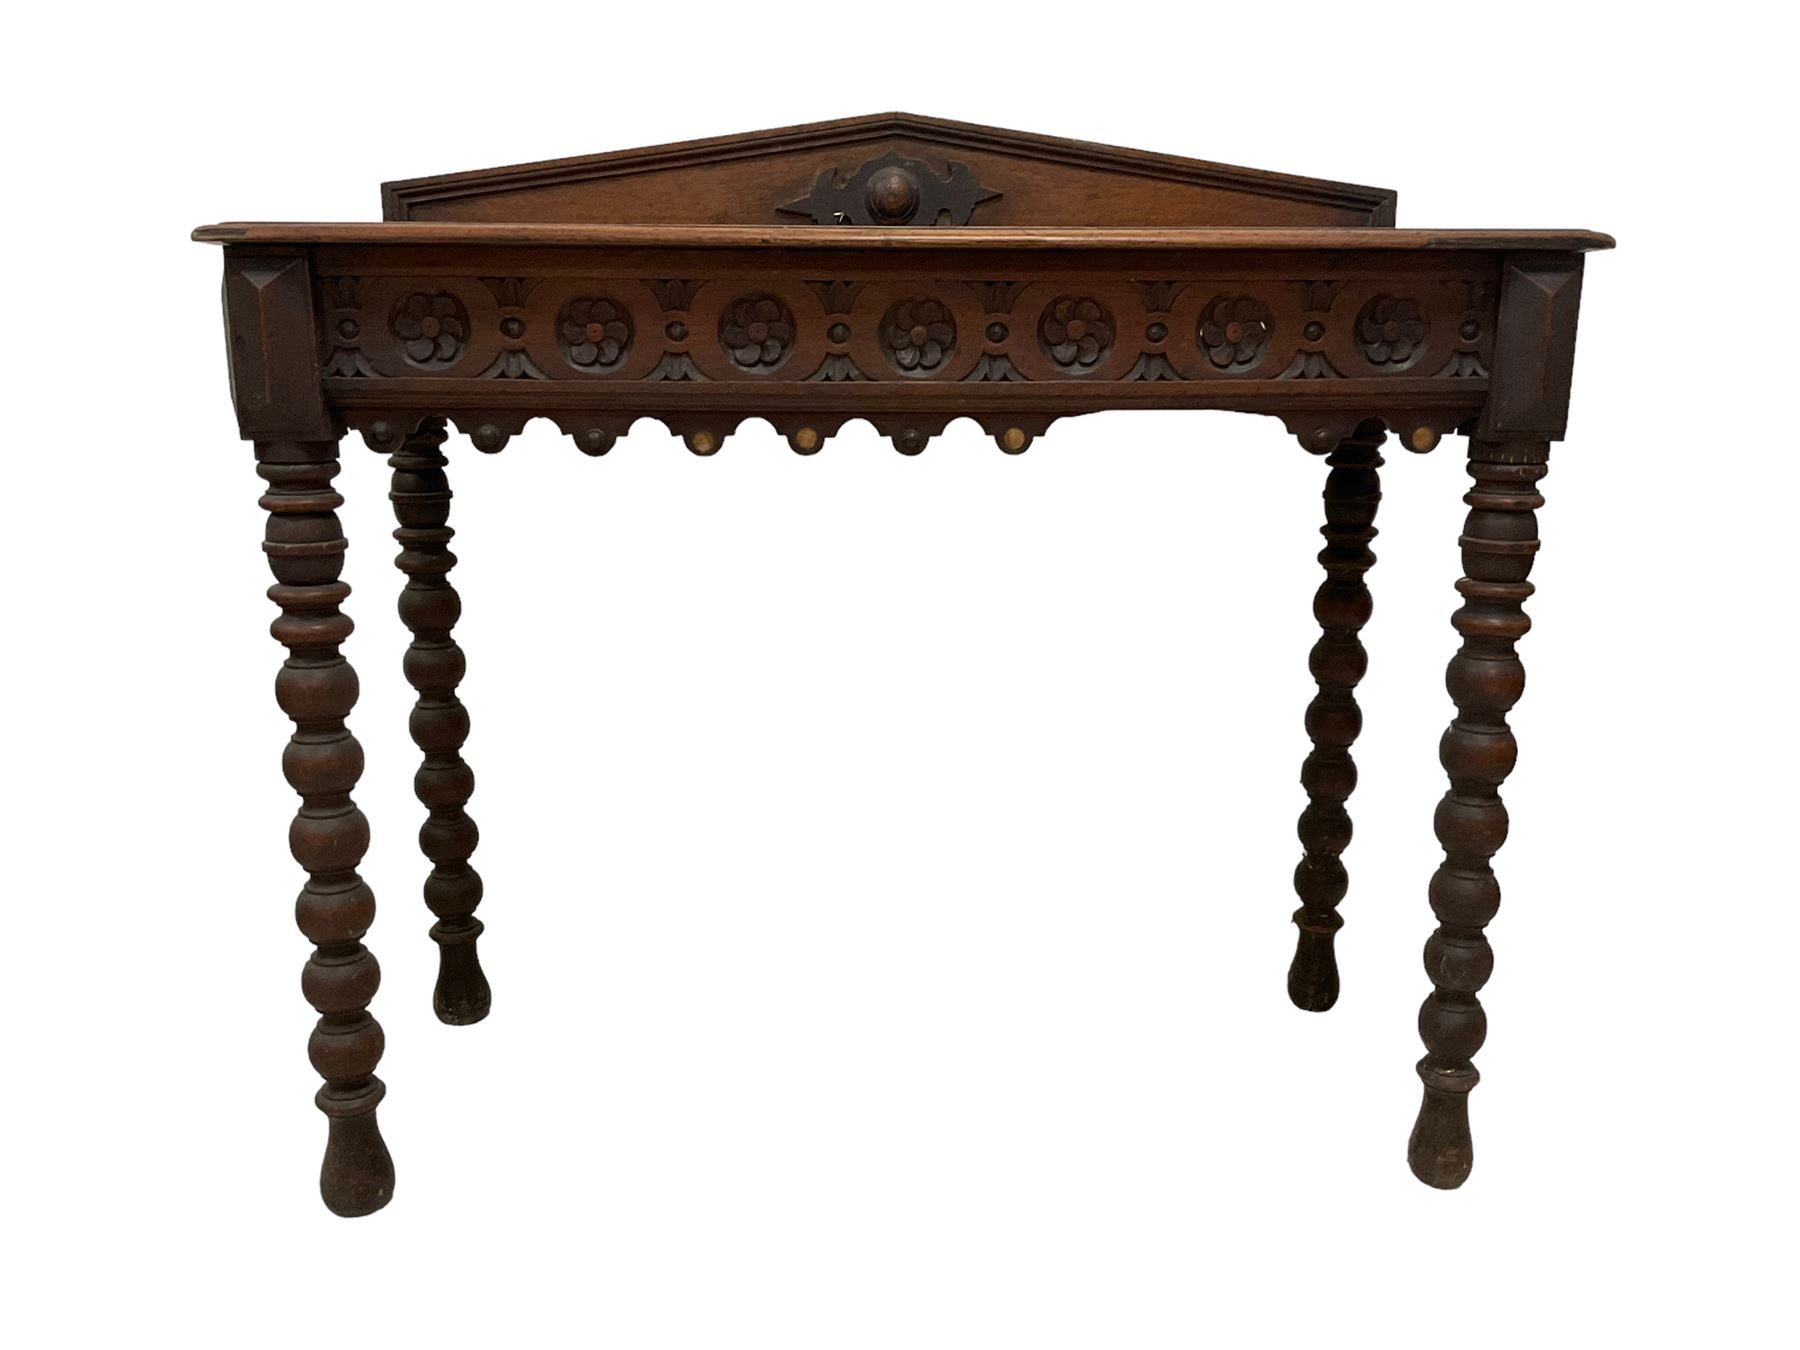 Late 19th century carved oak console or side table